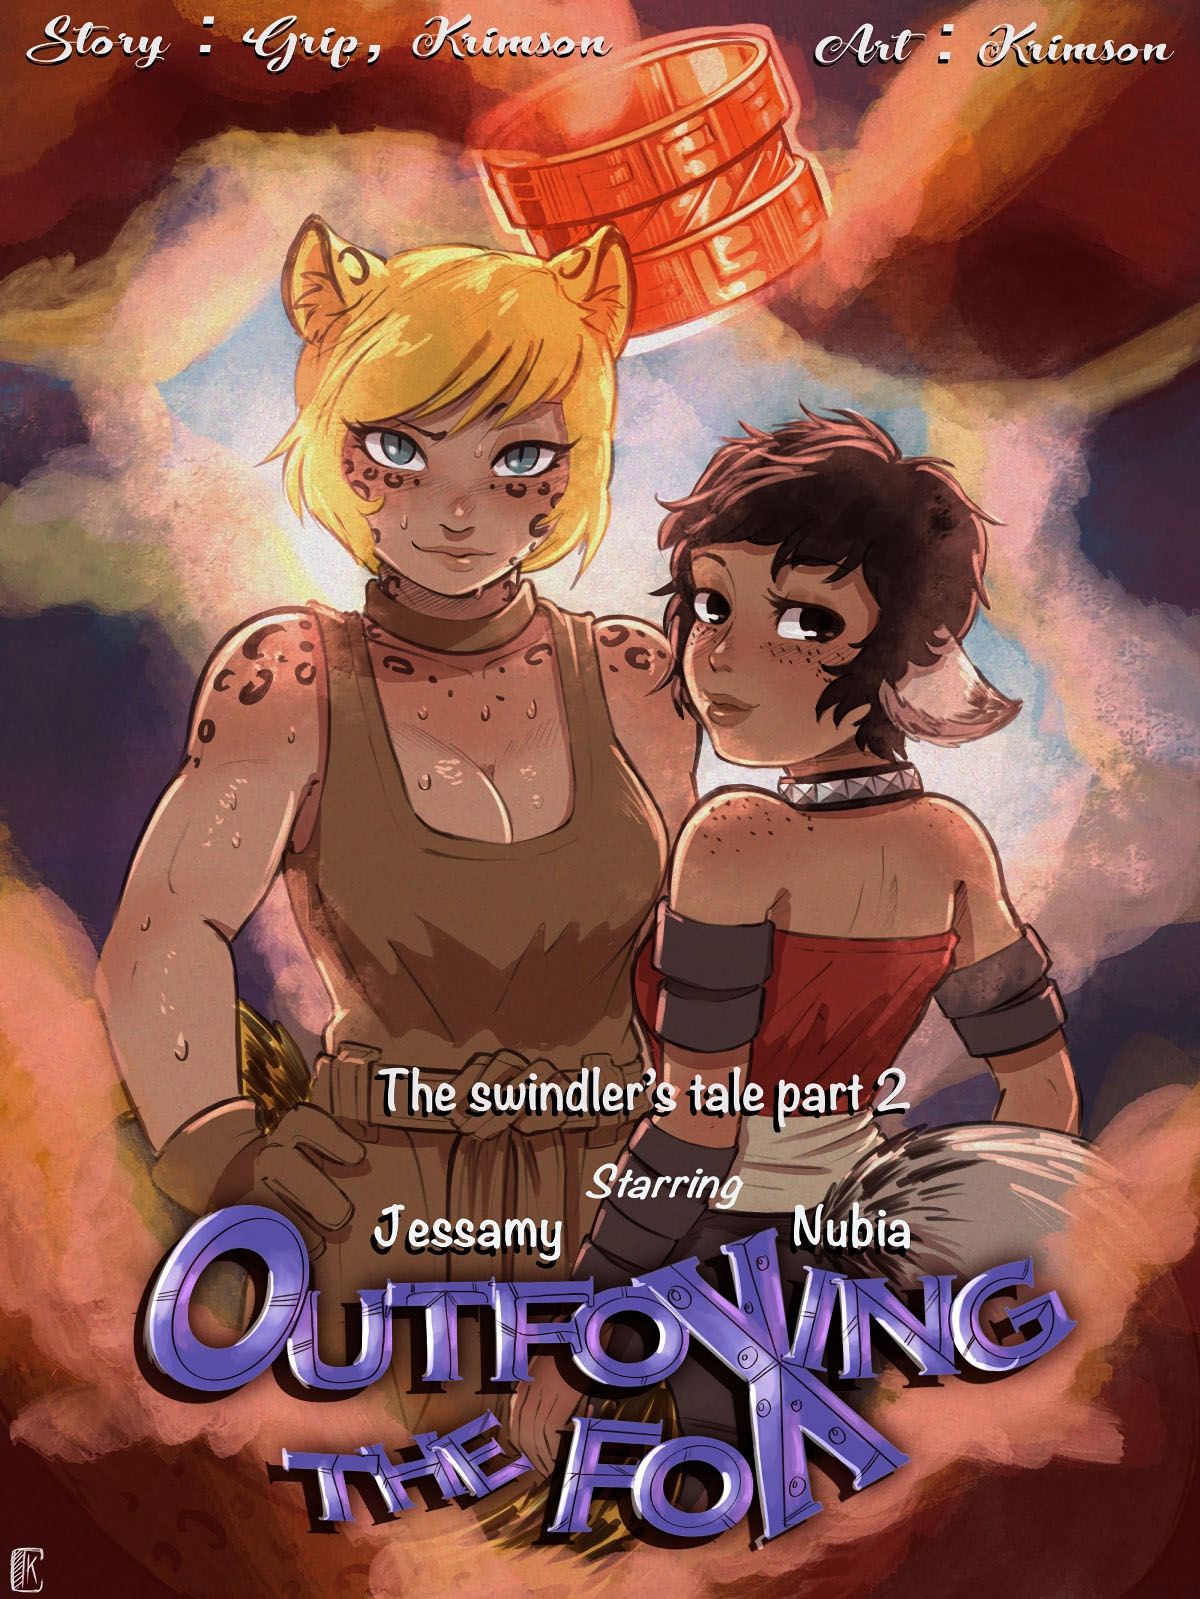 The SWINDLERS TALE 2 - Outfoxing the Fox